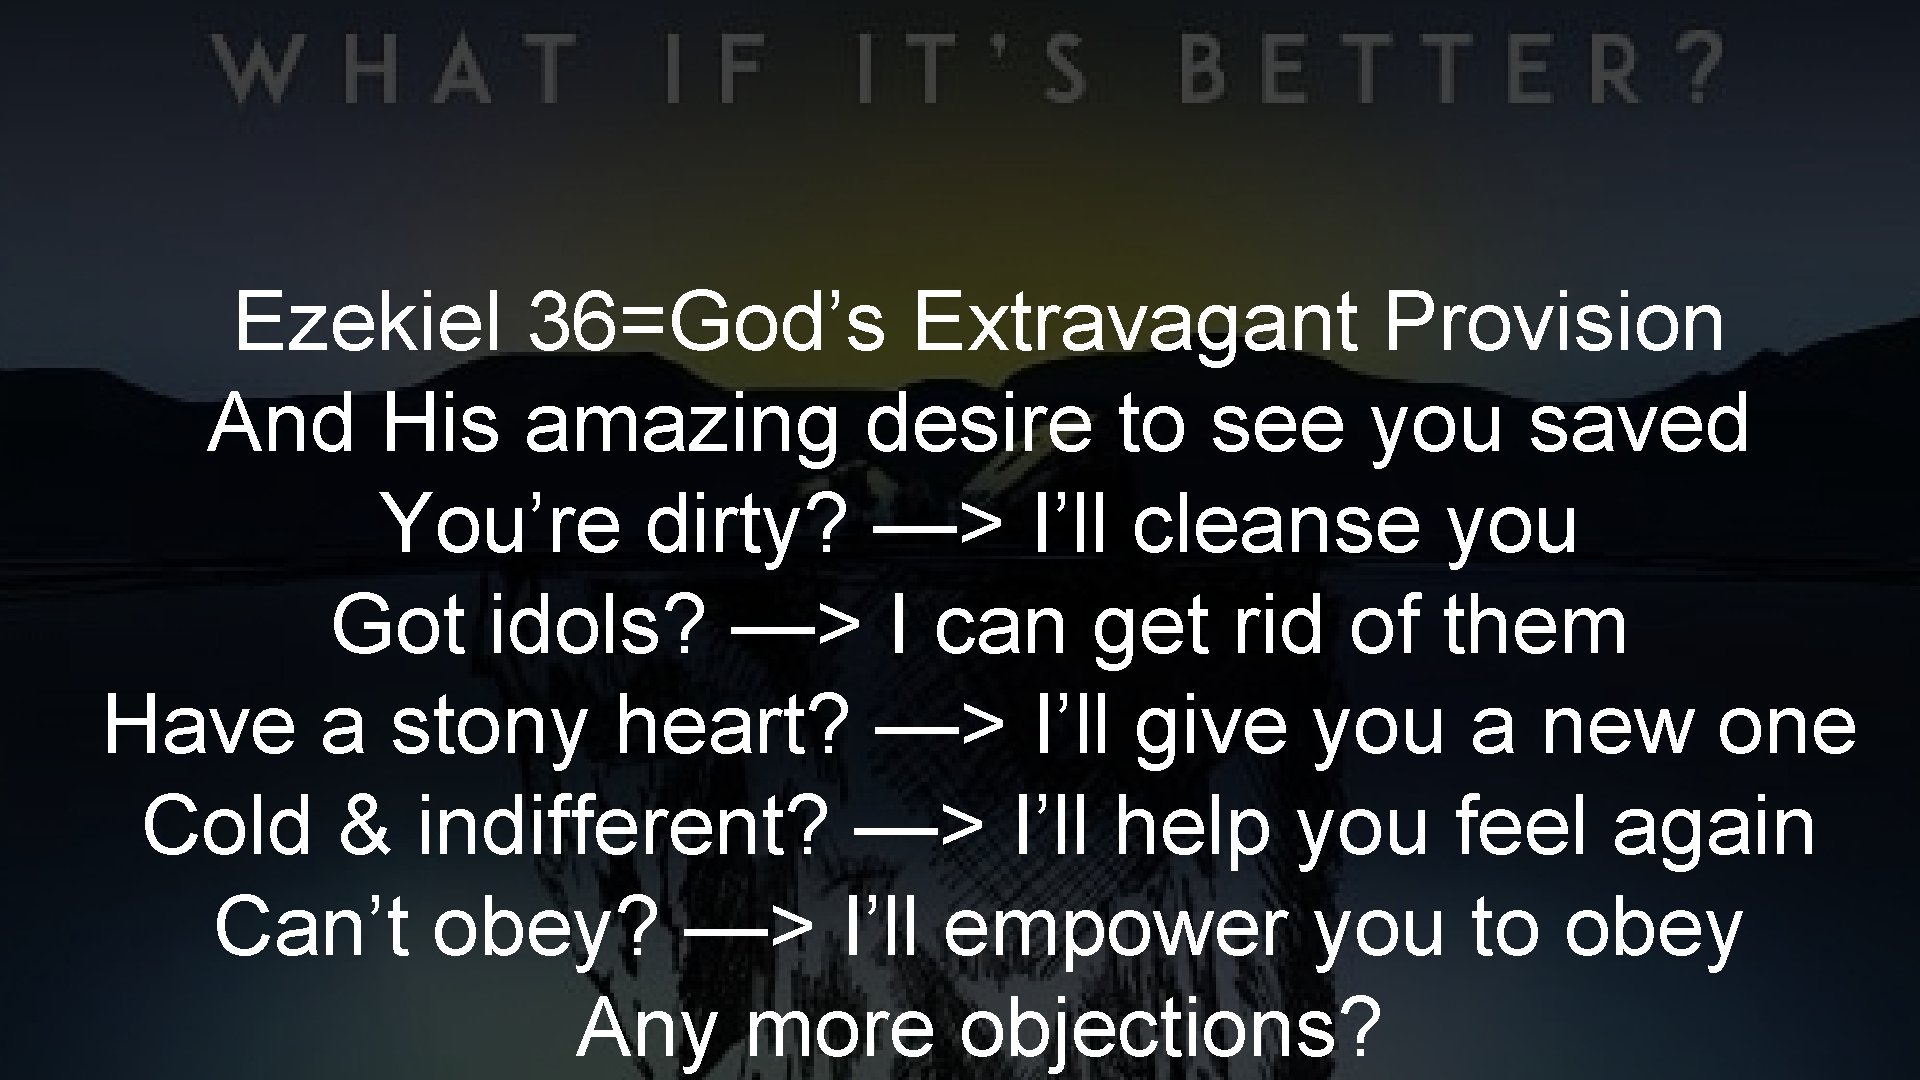 Ezekiel 36=God’s Extravagant Provision And His amazing desire to see you saved You’re dirty?